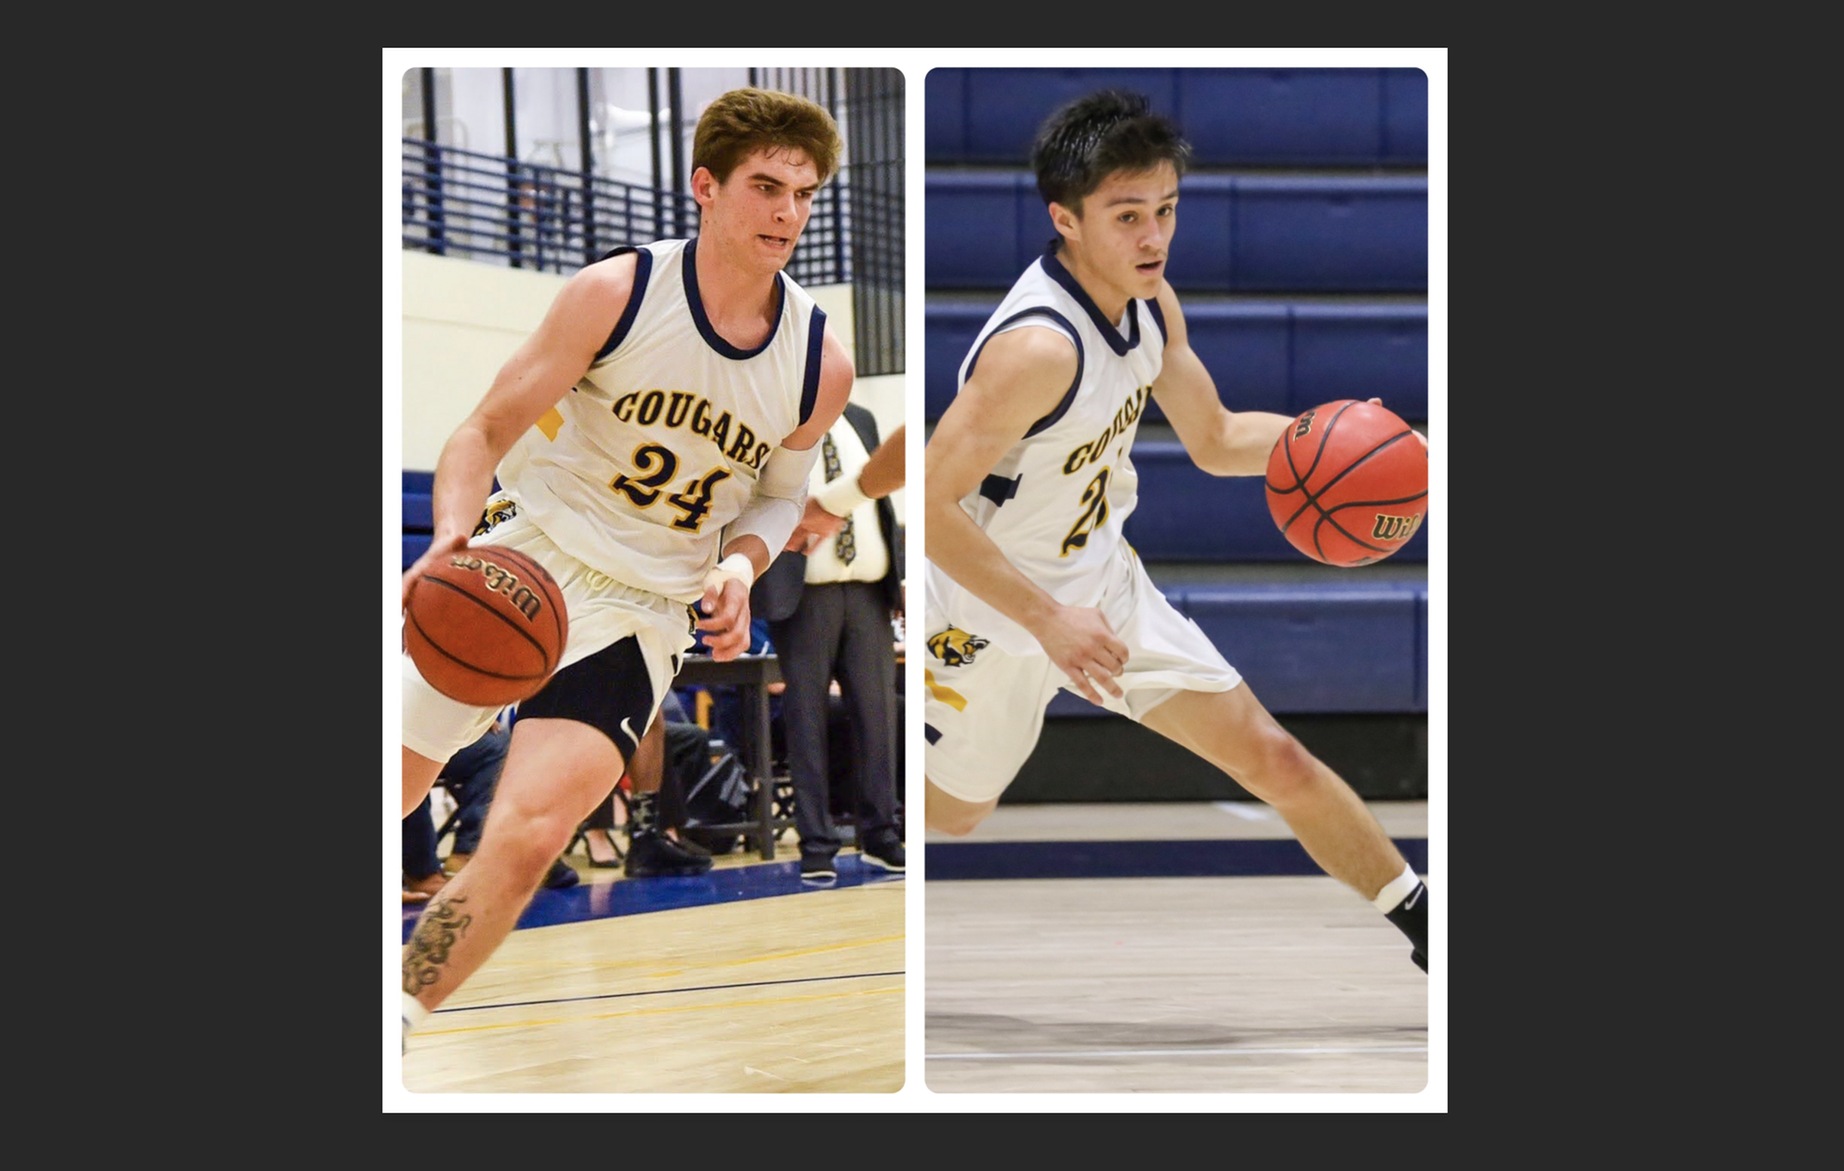 College of the Canyons men's basketball players Zach Phipps and Joel Carrillo, members of the 2019-20 Academic All State Team.